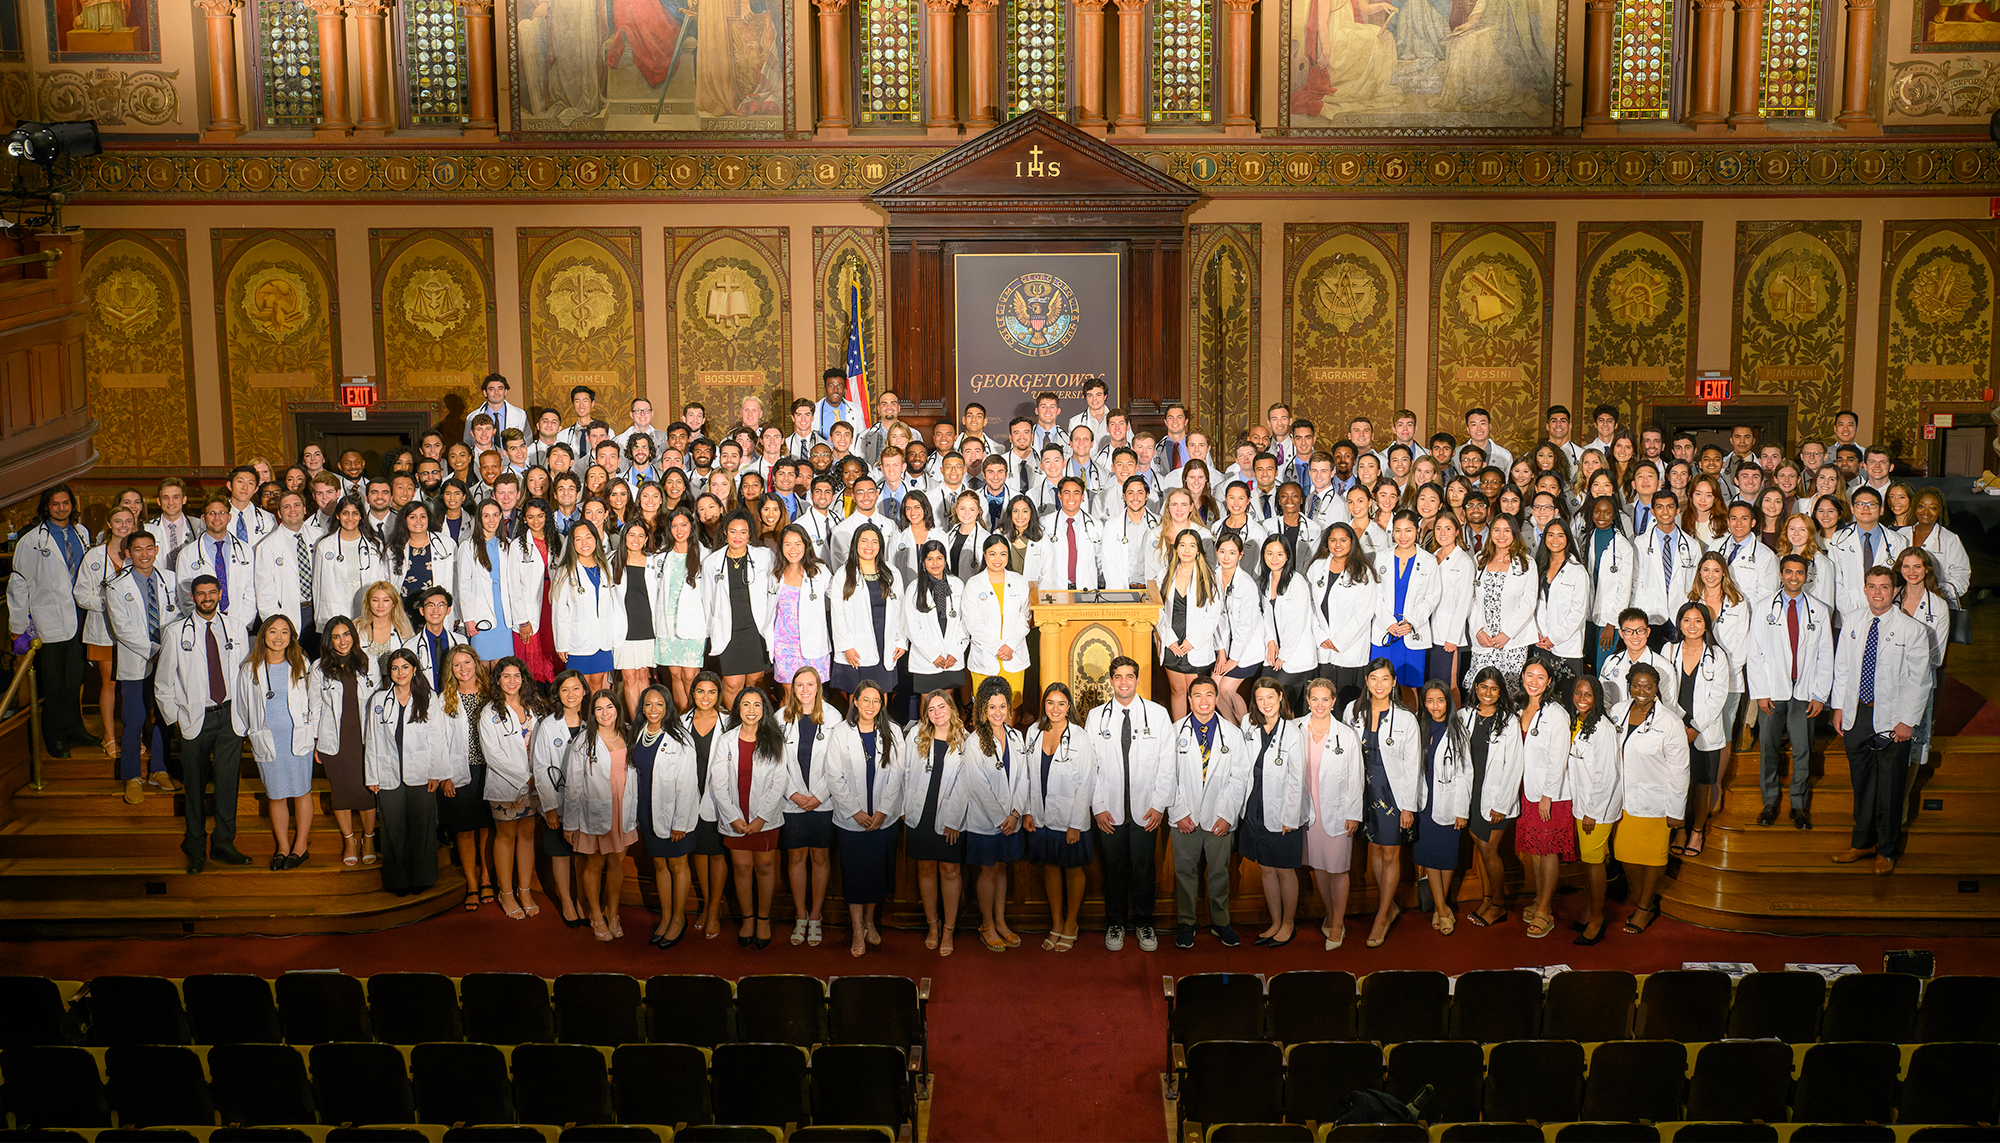 The 208 members of the Class of 2026 stand together in Gaston Hall